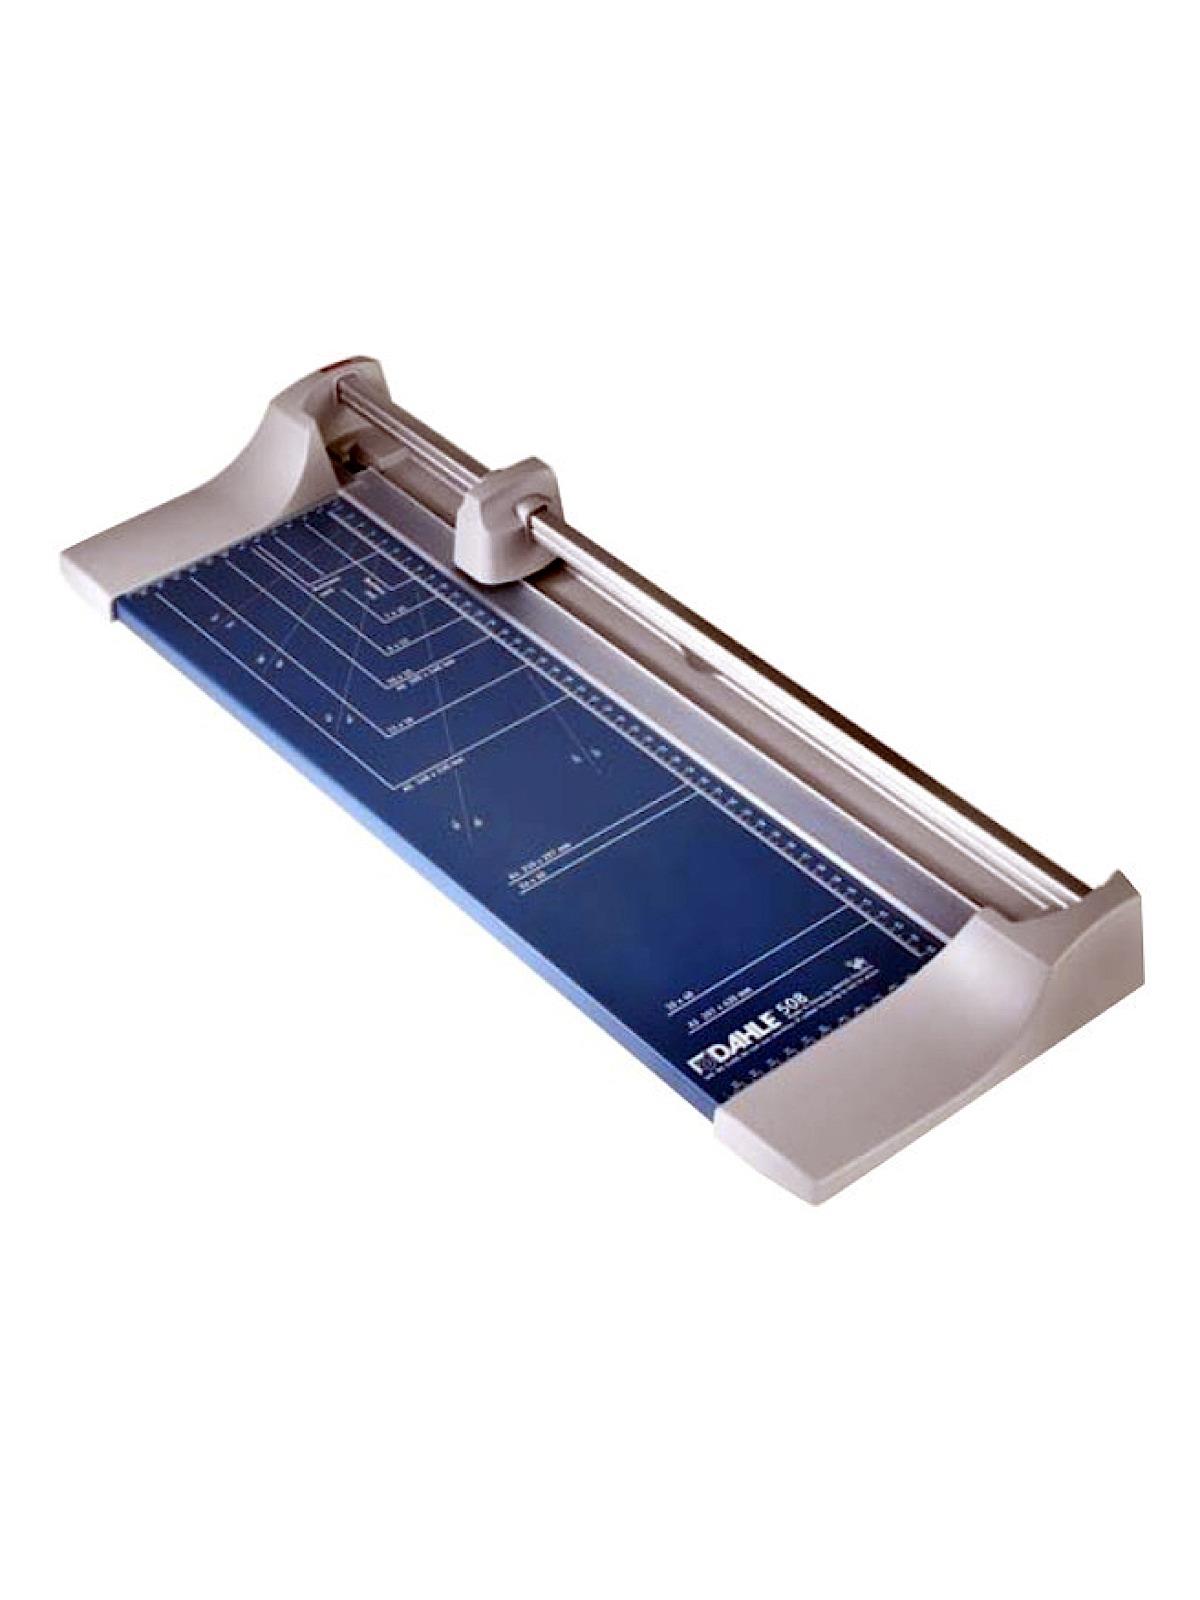 Dahle Personal Rolling Trimmers 18 in. cut length